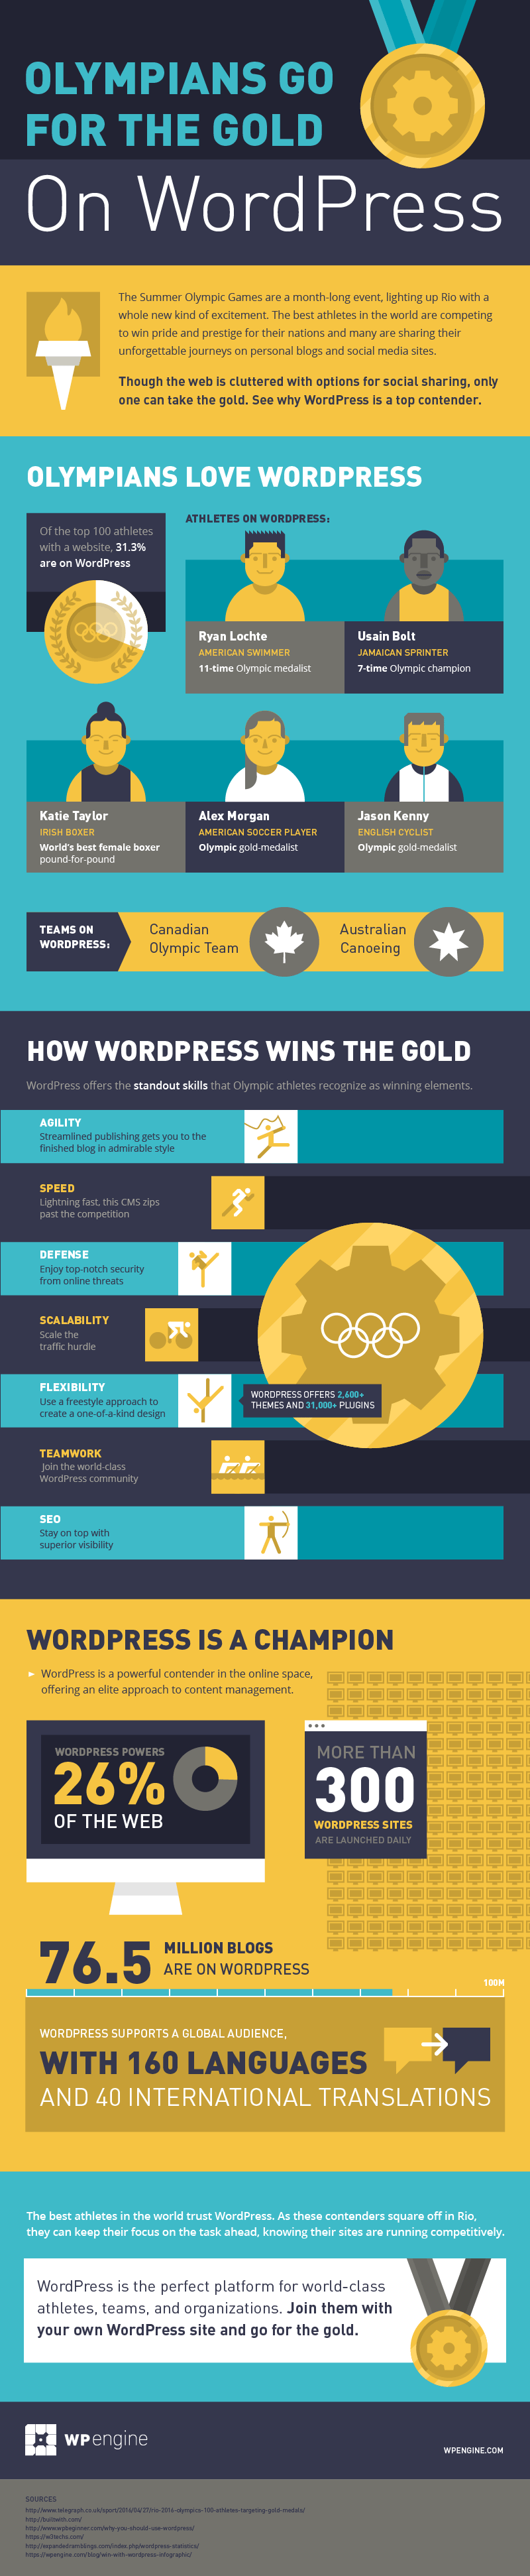 Olympians Go For The Gold On WordPress [Infographic]